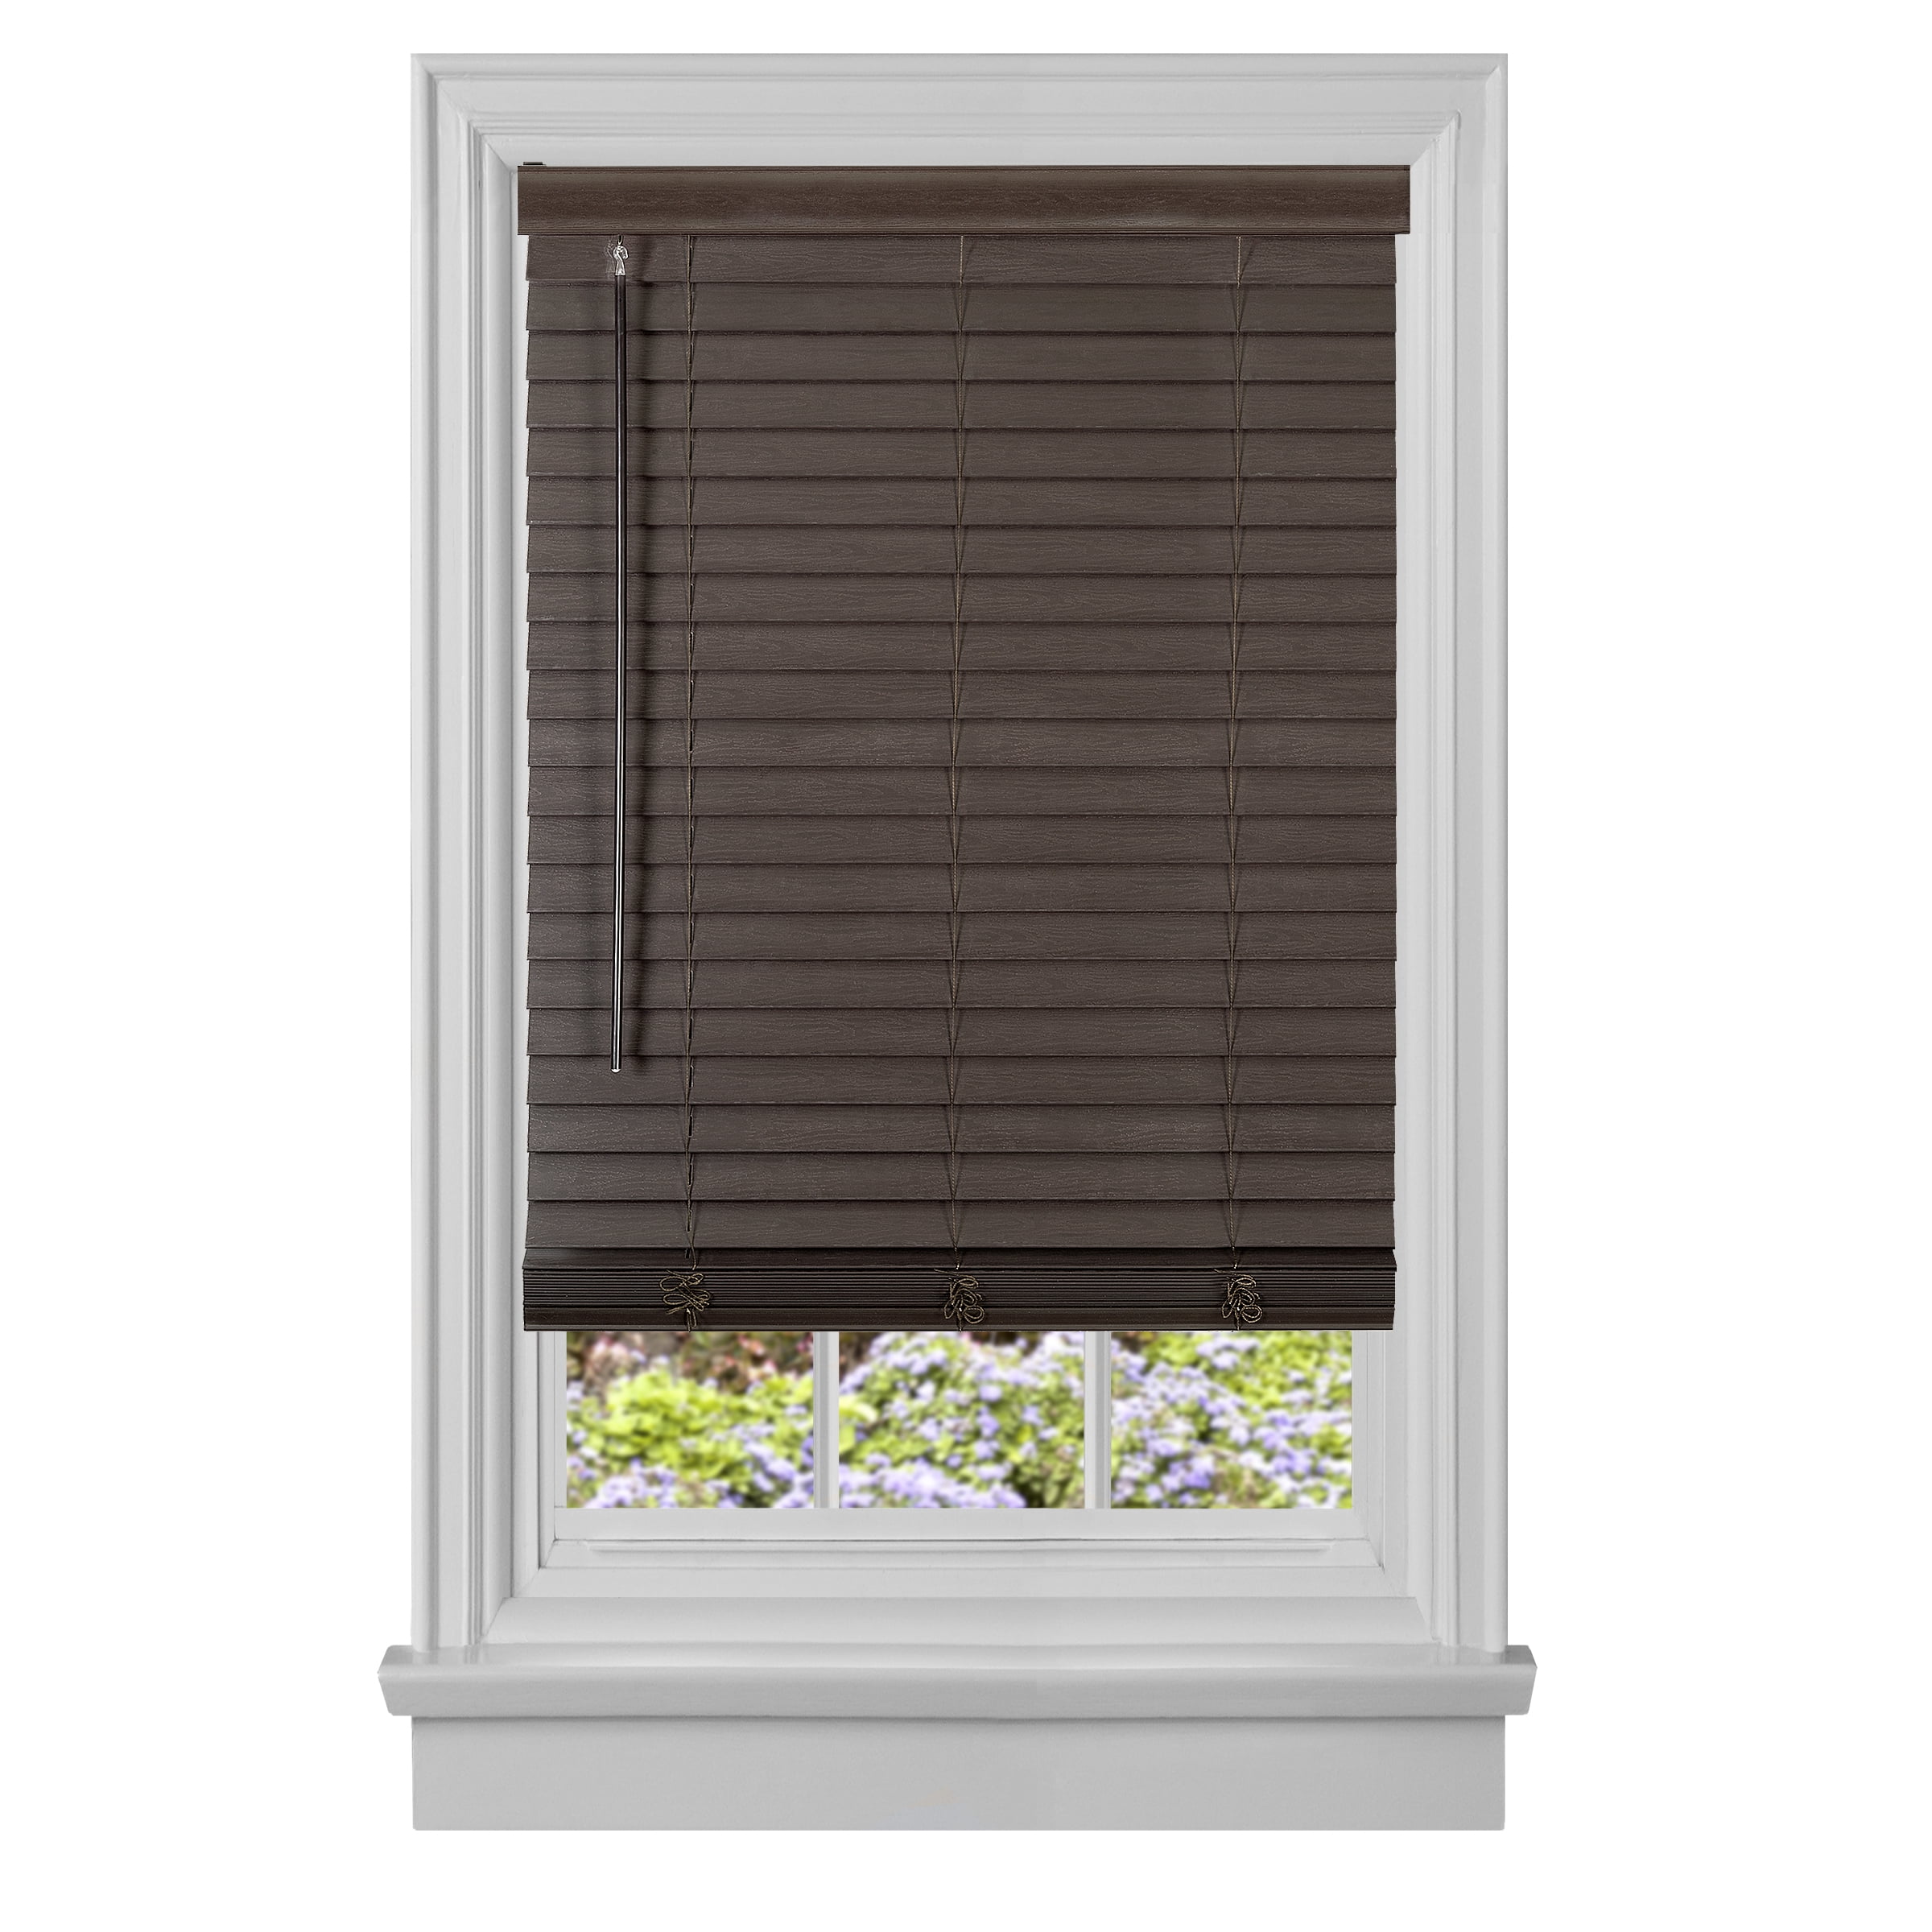 Picture of Achim MFG236MH02 36 x 64 in. Cordless GII Madera Falsa 2 in. Faux Wood Plantation Blind - Mahogany